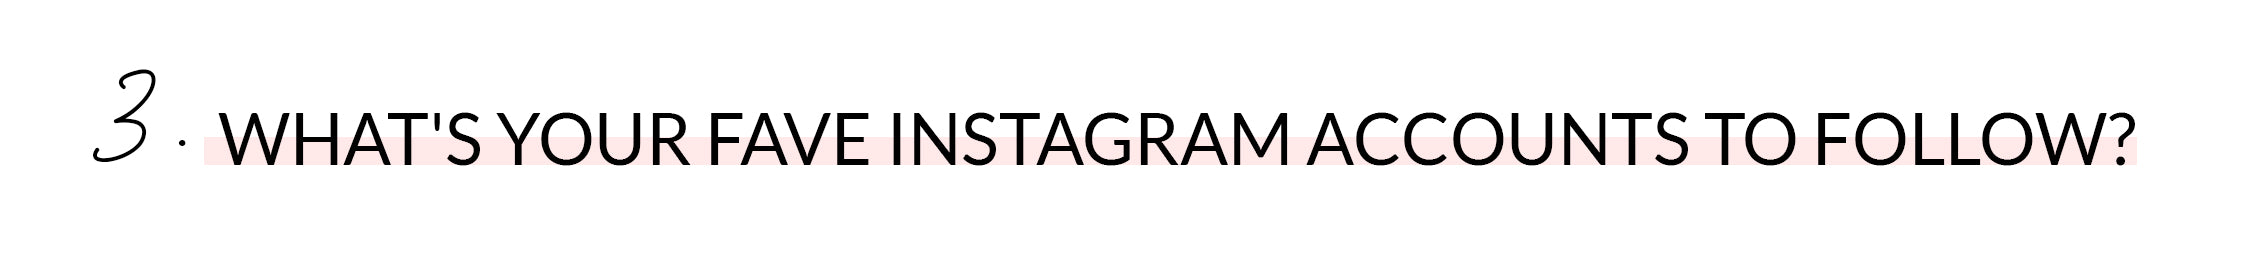  3. WHAT'S YOUR FAVE INSTAGRAM ACCOUNTS TO FOLLOW?